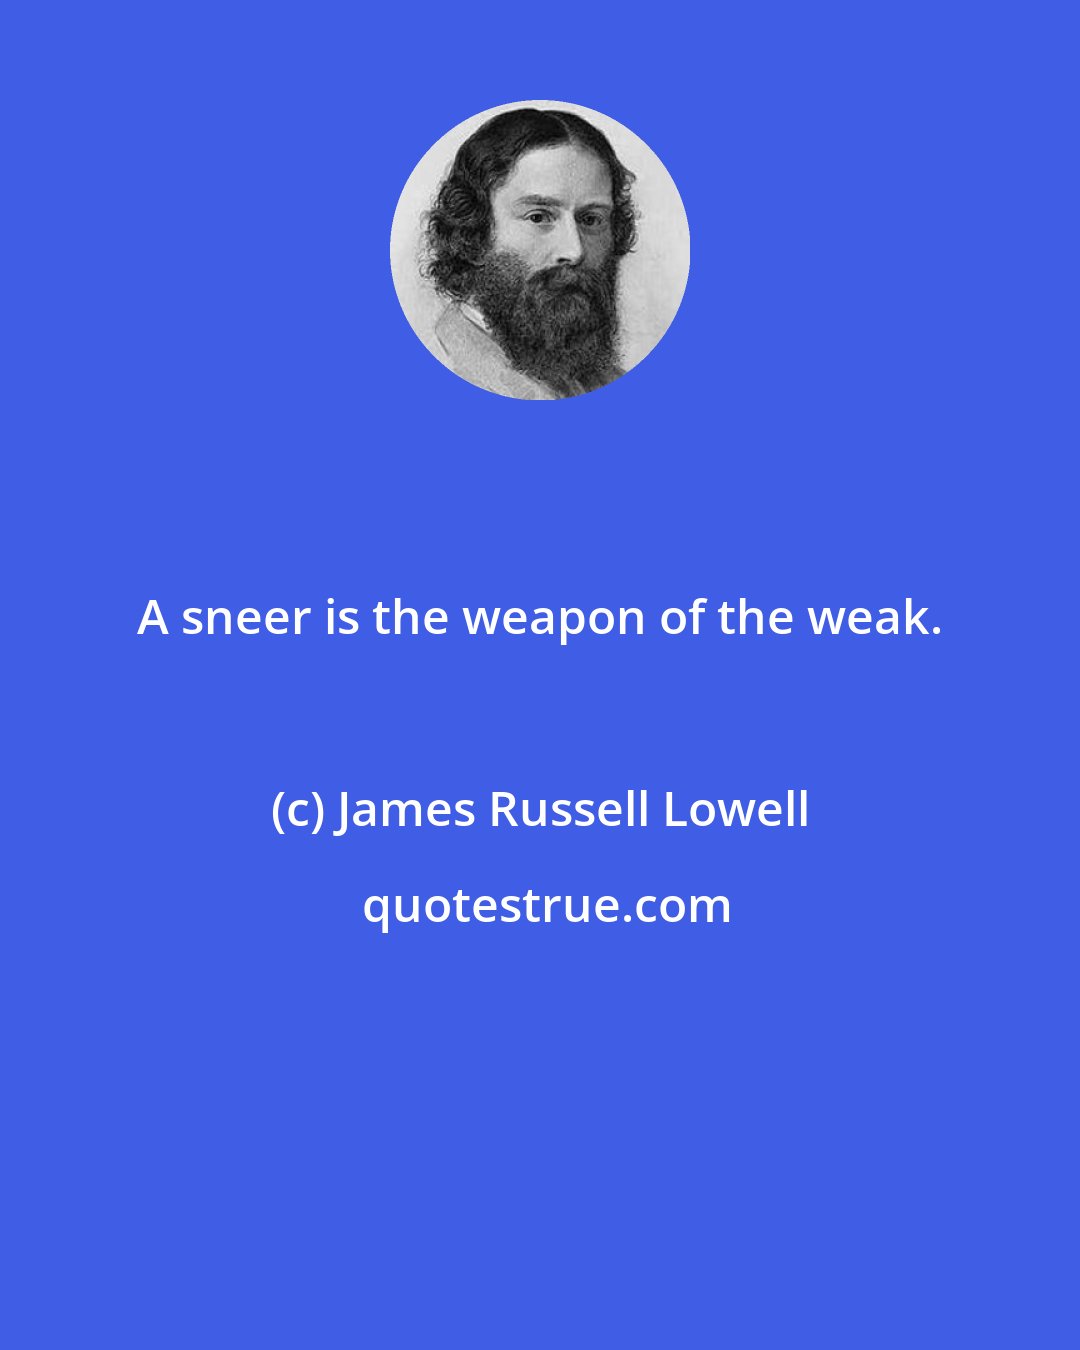 James Russell Lowell: A sneer is the weapon of the weak.